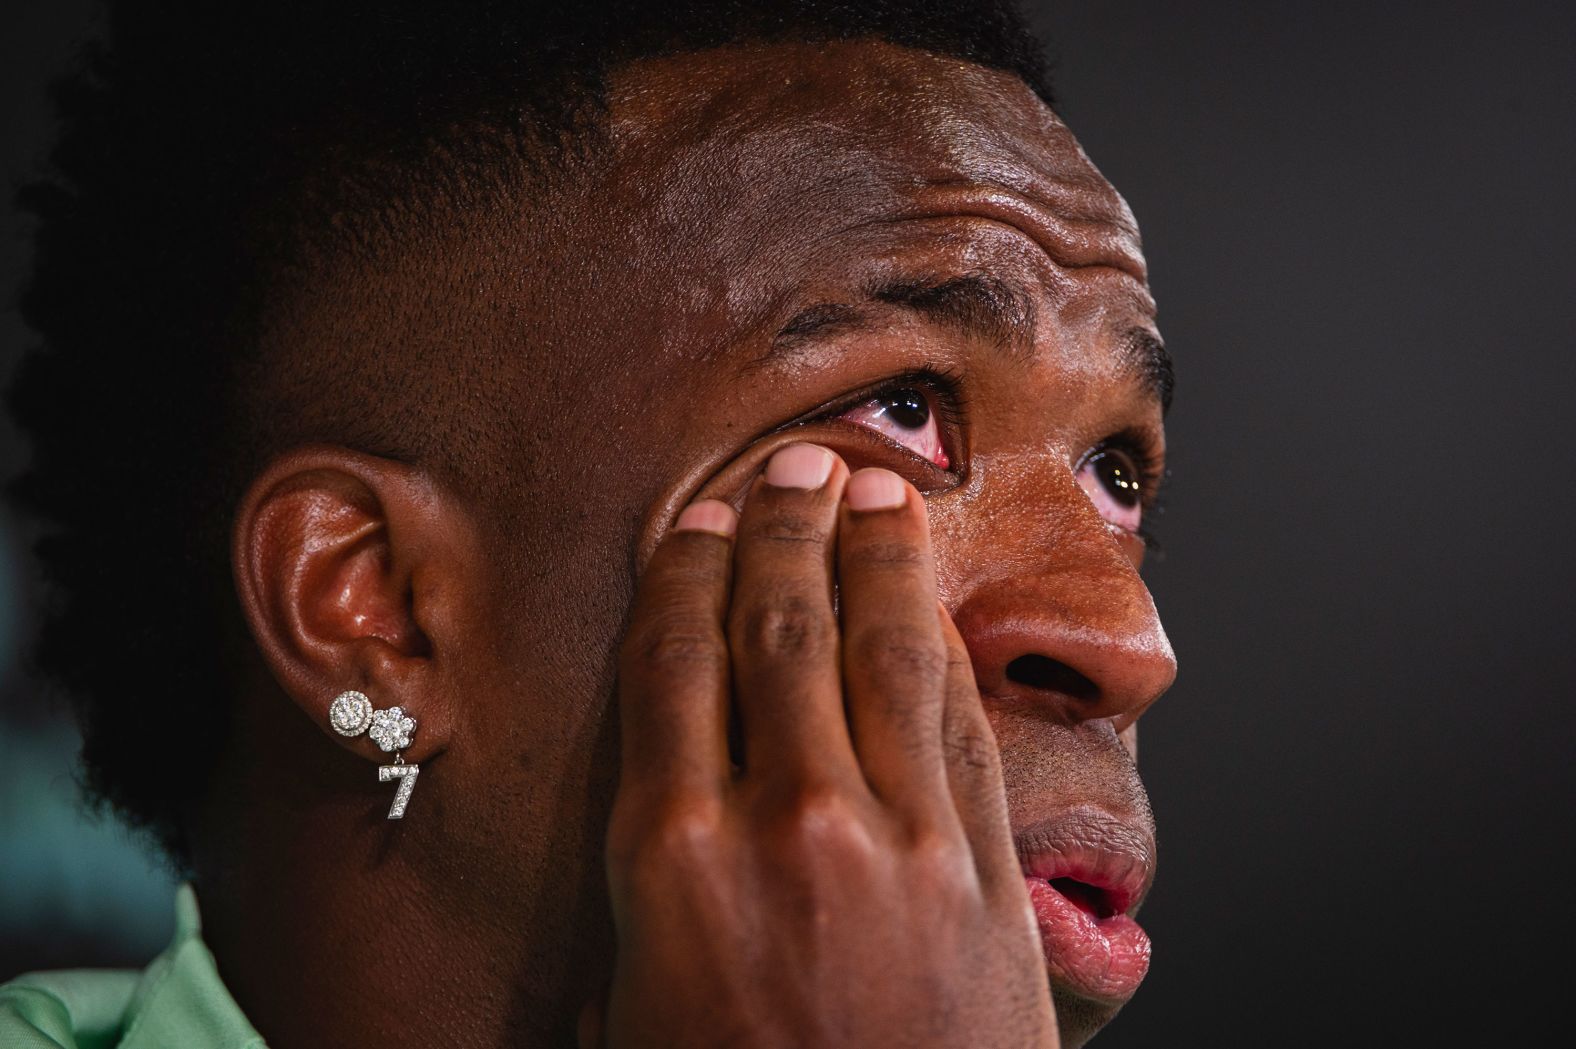 Brazilian footballer Vinícius Jr. breaks down in tears Monday, March 25, as he <a href="index.php?page=&url=https%3A%2F%2Fwww.cnn.com%2F2024%2F03%2F26%2Fsport%2Fvinicius-jr-racism-press-conference-tears-spt-intl%2Findex.html" target="_blank">speaks about his experience with racist abuse in Spain</a>. The Real Madrid star has been subjected to racism from fans of opposing teams on multiple occasions, and he said that he has struggled to remain positive and motivated toward soccer as a result of the abuse.